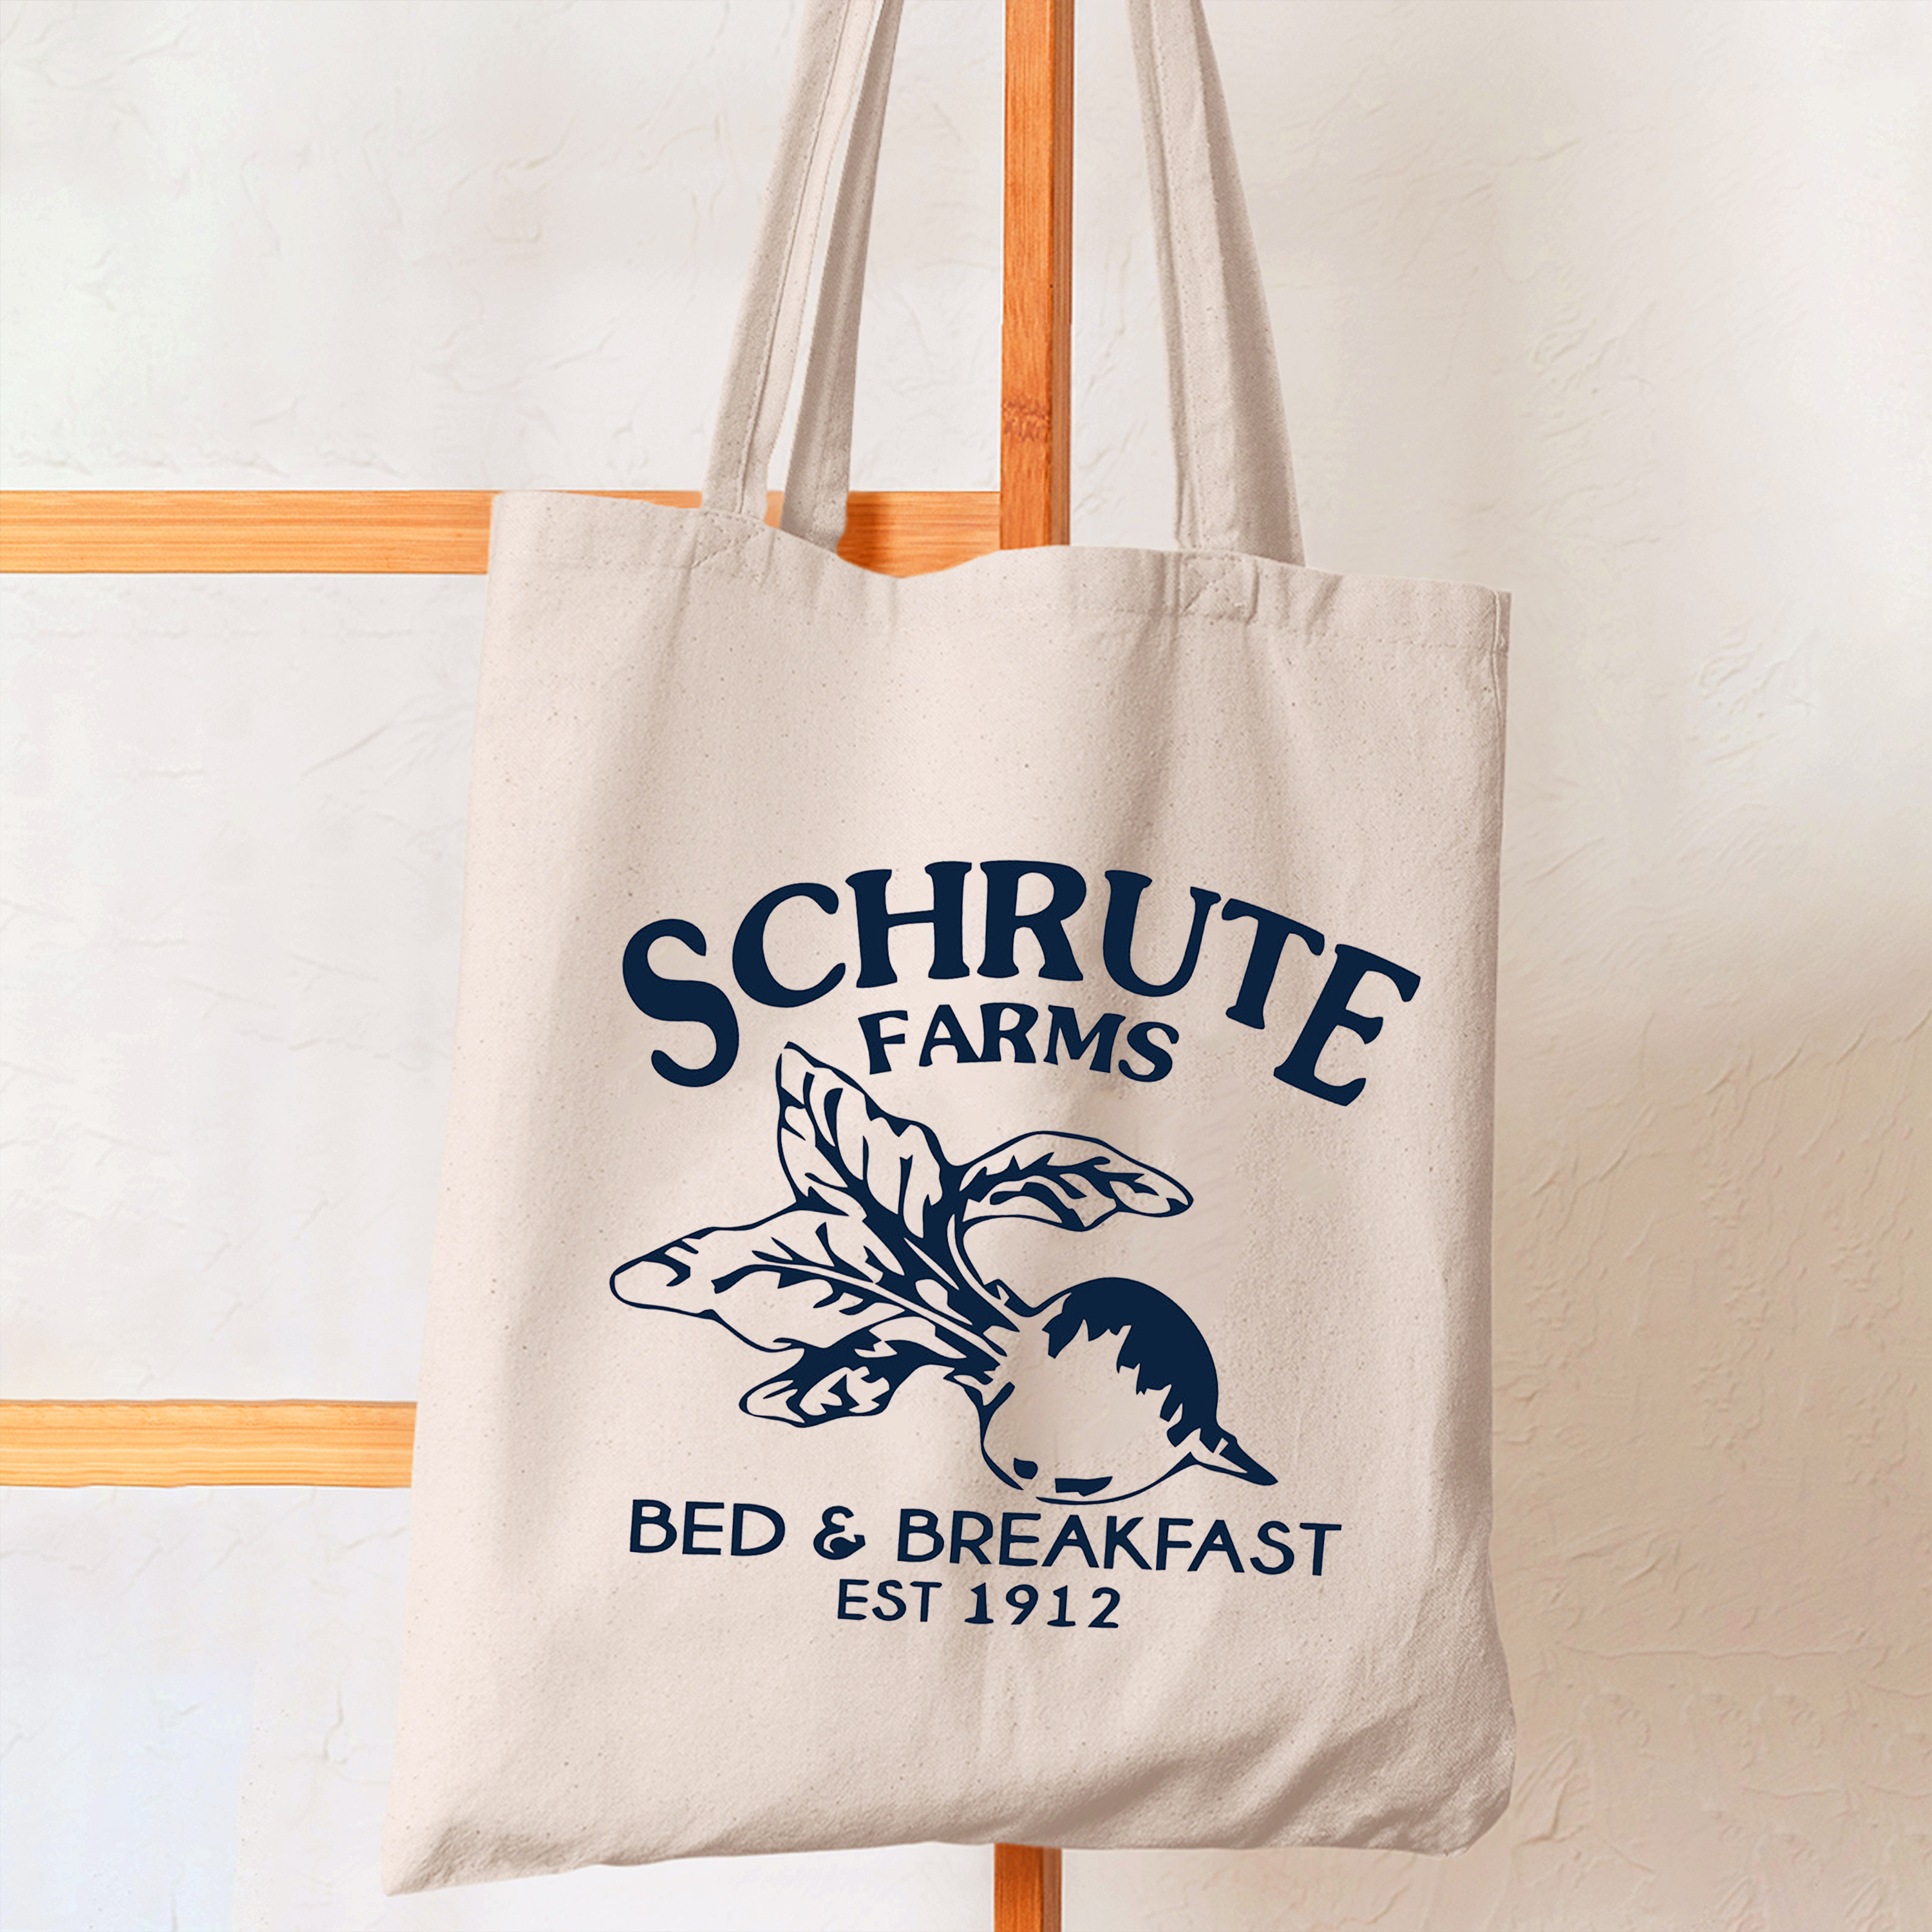 Schrute Farms Daily Tote Bag